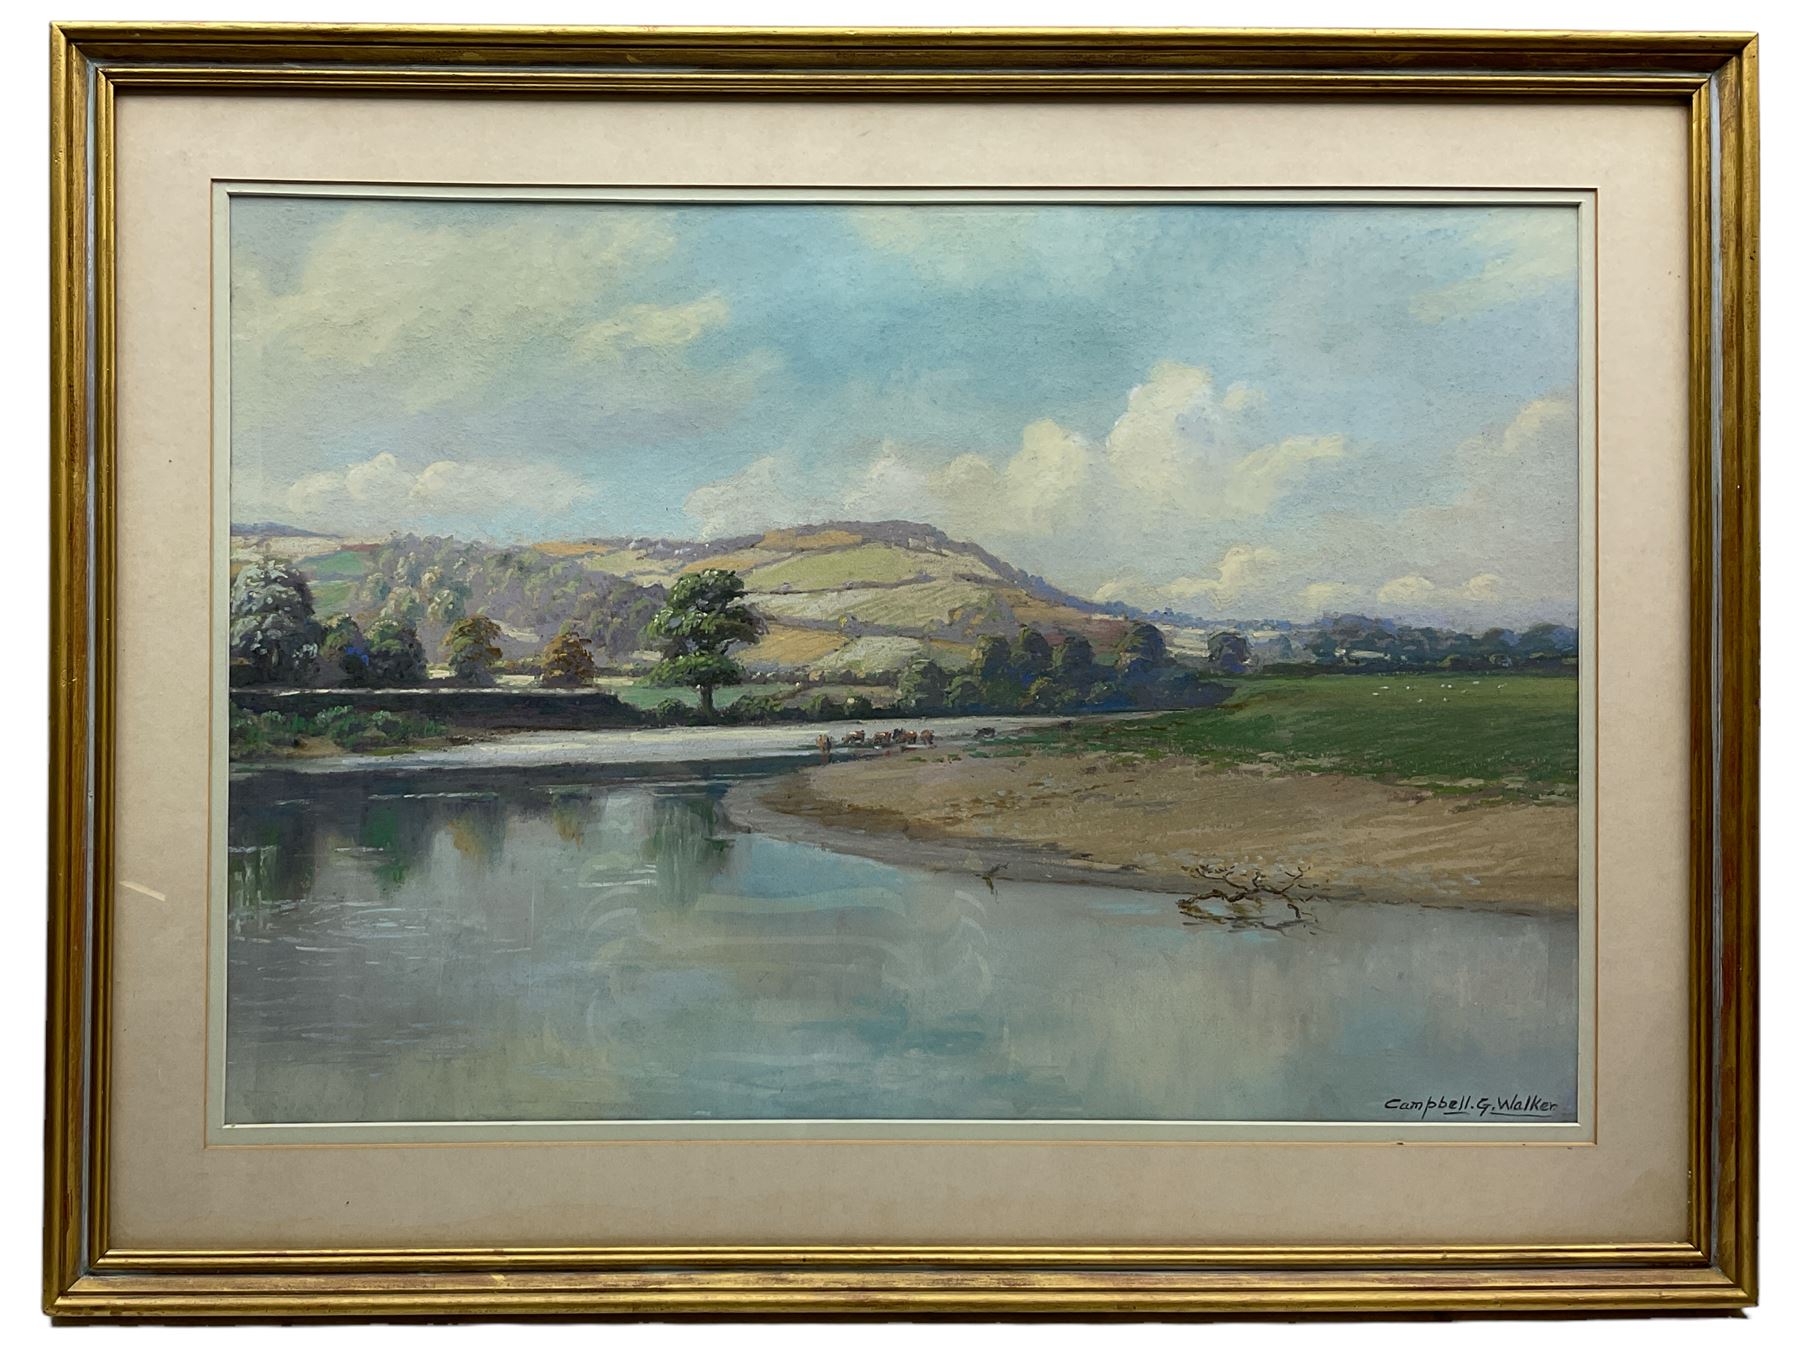 Campbell G Walker (British 20th century): River Landscape with Cattle Watering - Image 2 of 2